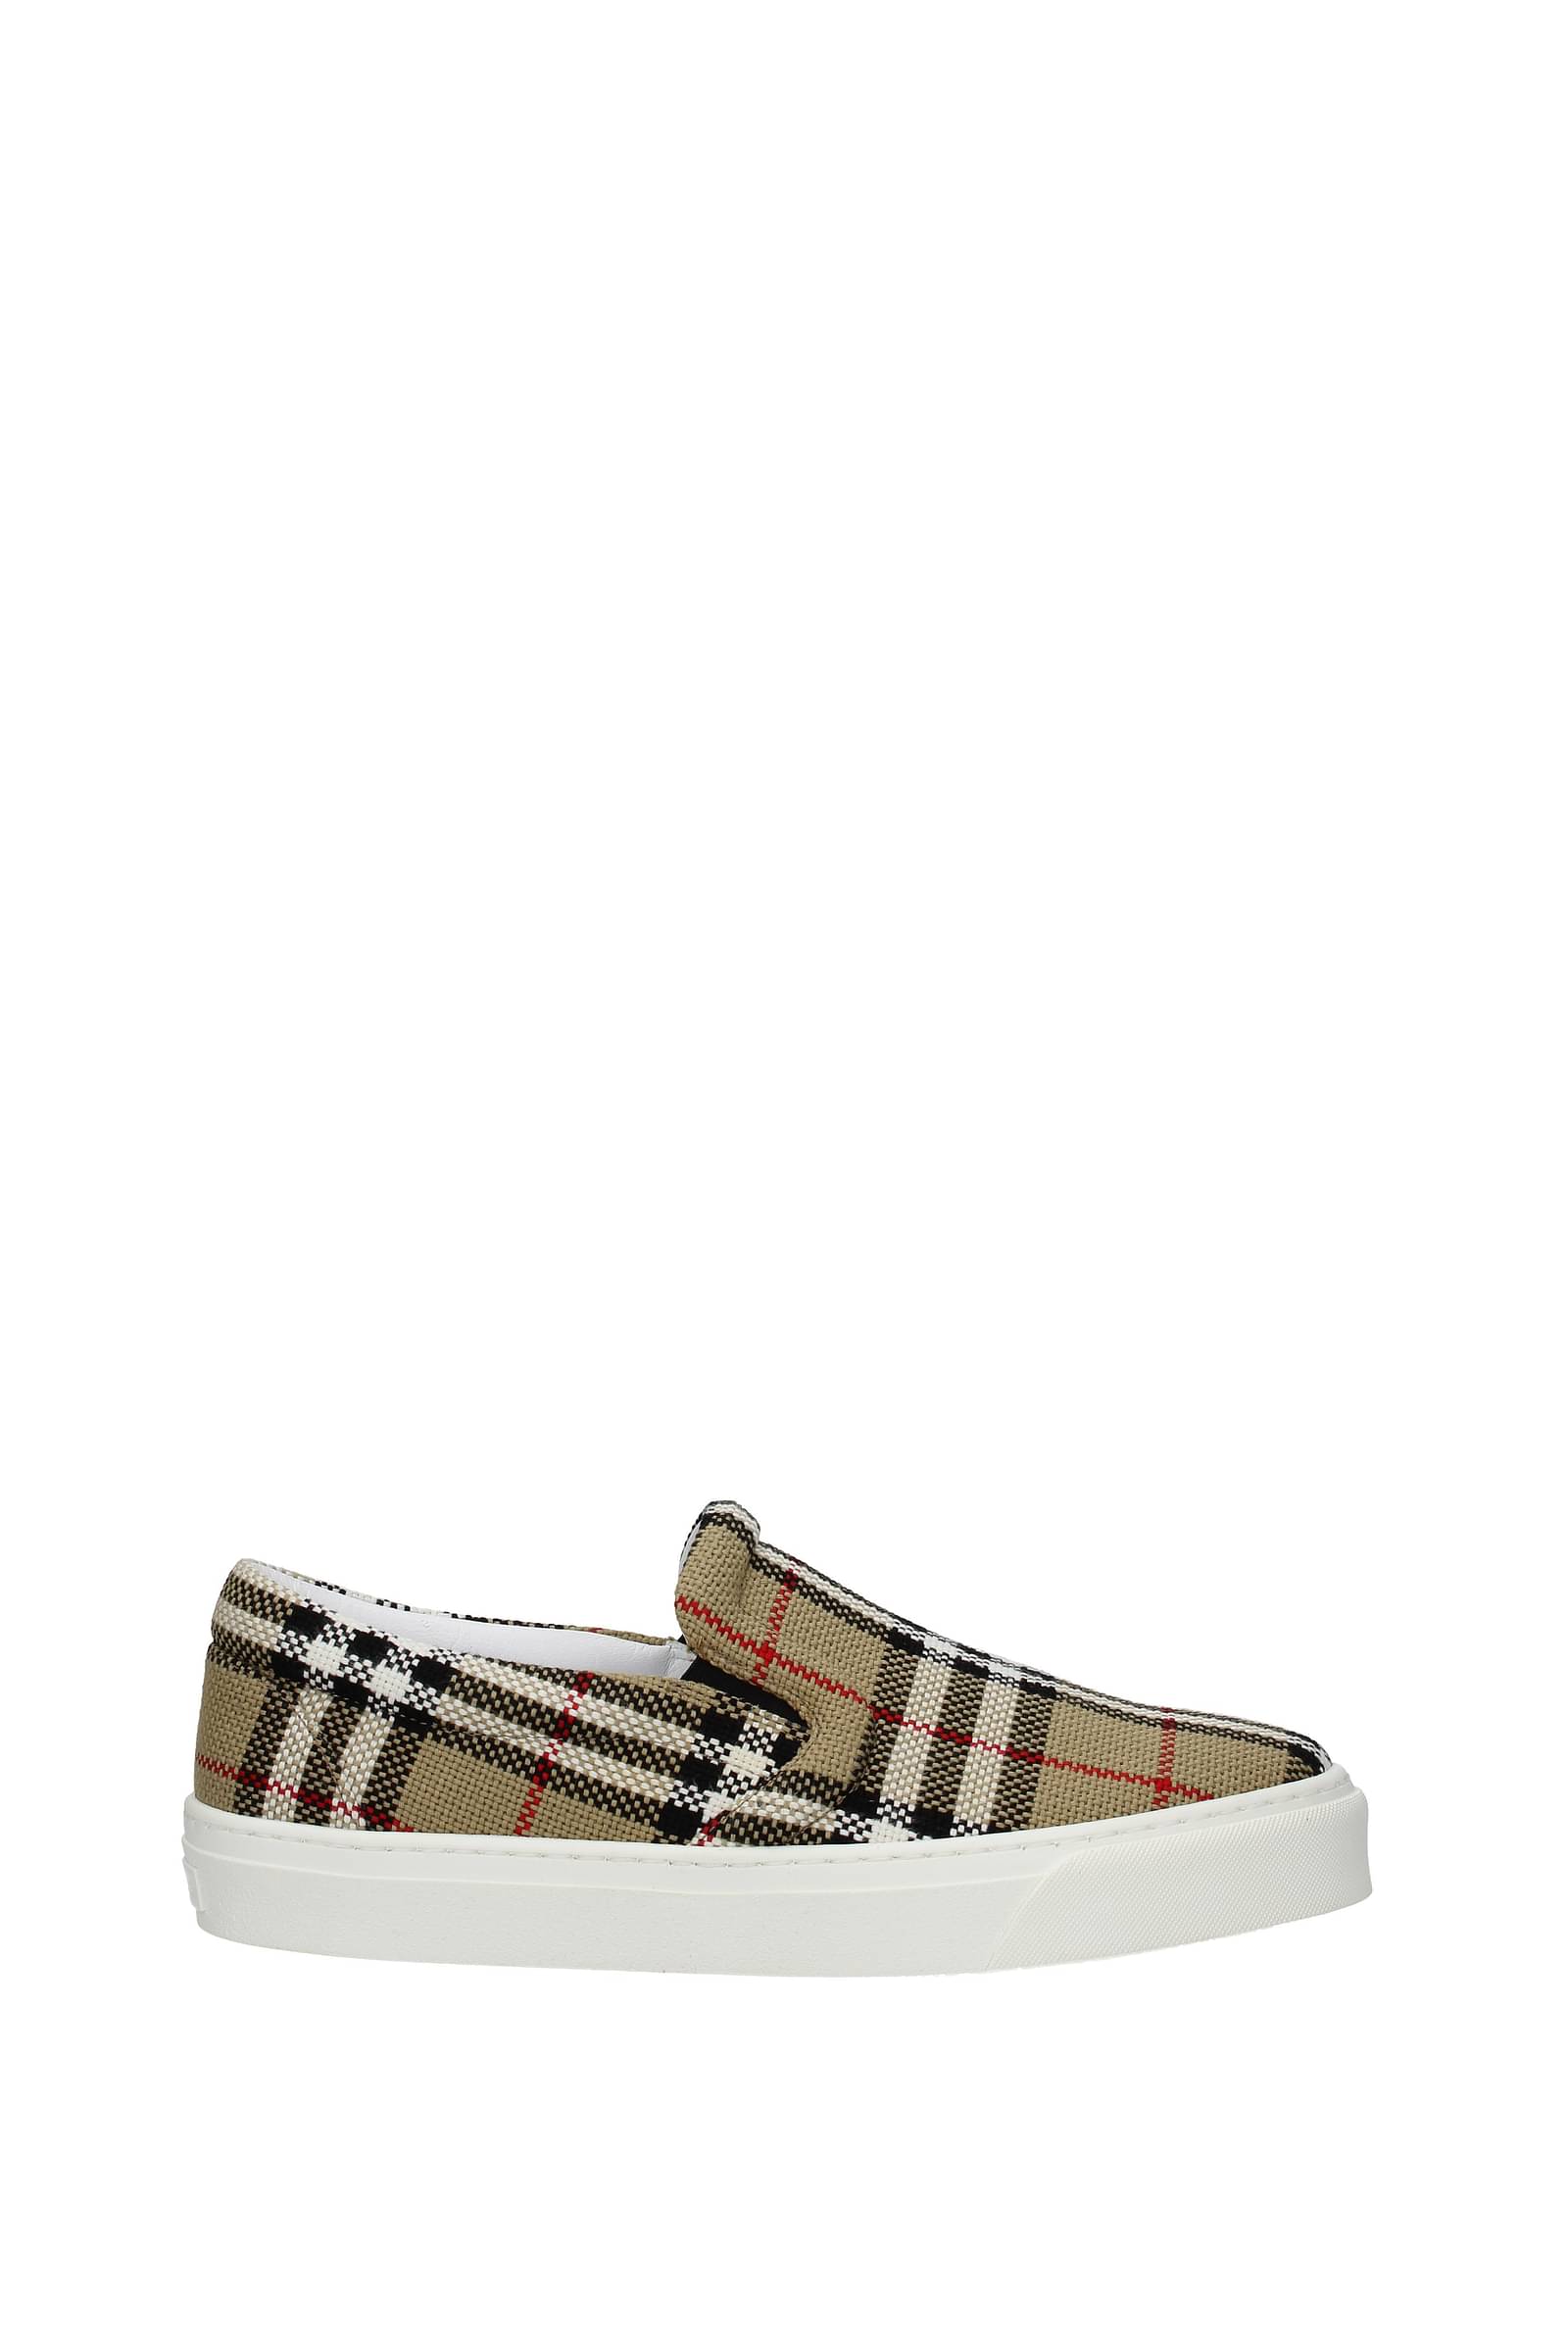 burberry outlet shoes